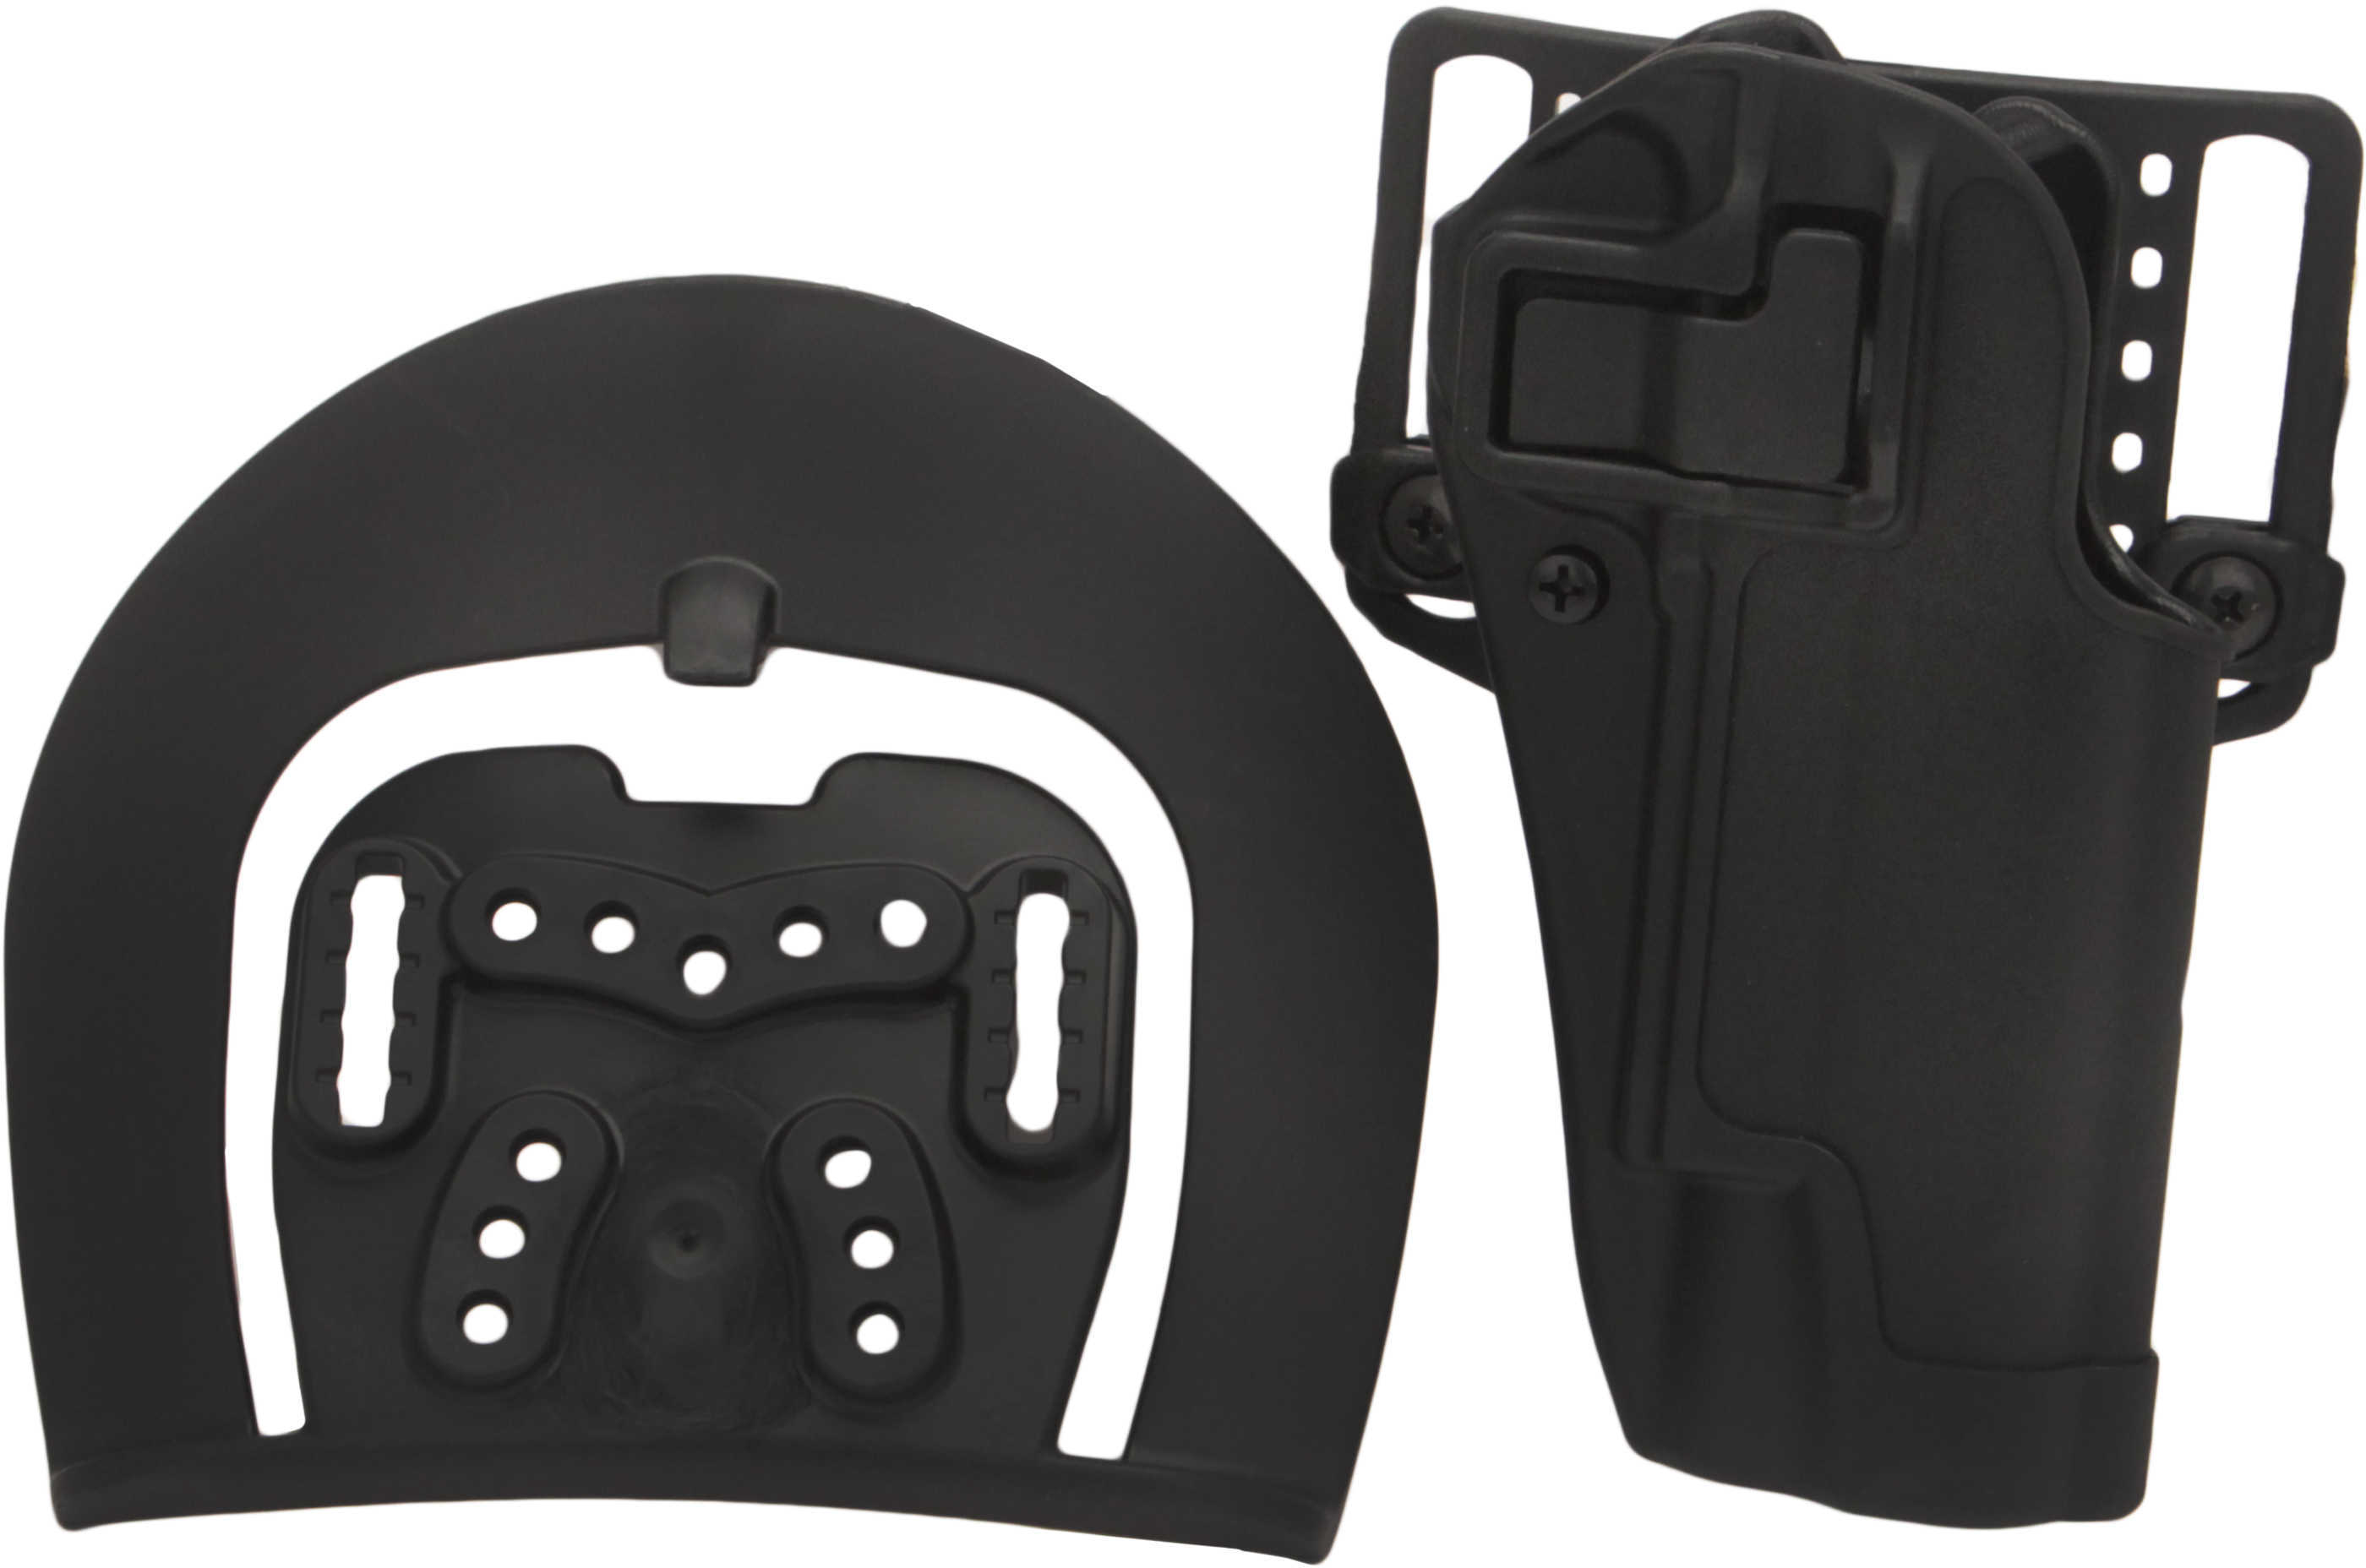 BLACKHAWK! CQC SERPA Holster With Belt and Paddle Attachment Fits Colt Government Right Hand 410503BK-R